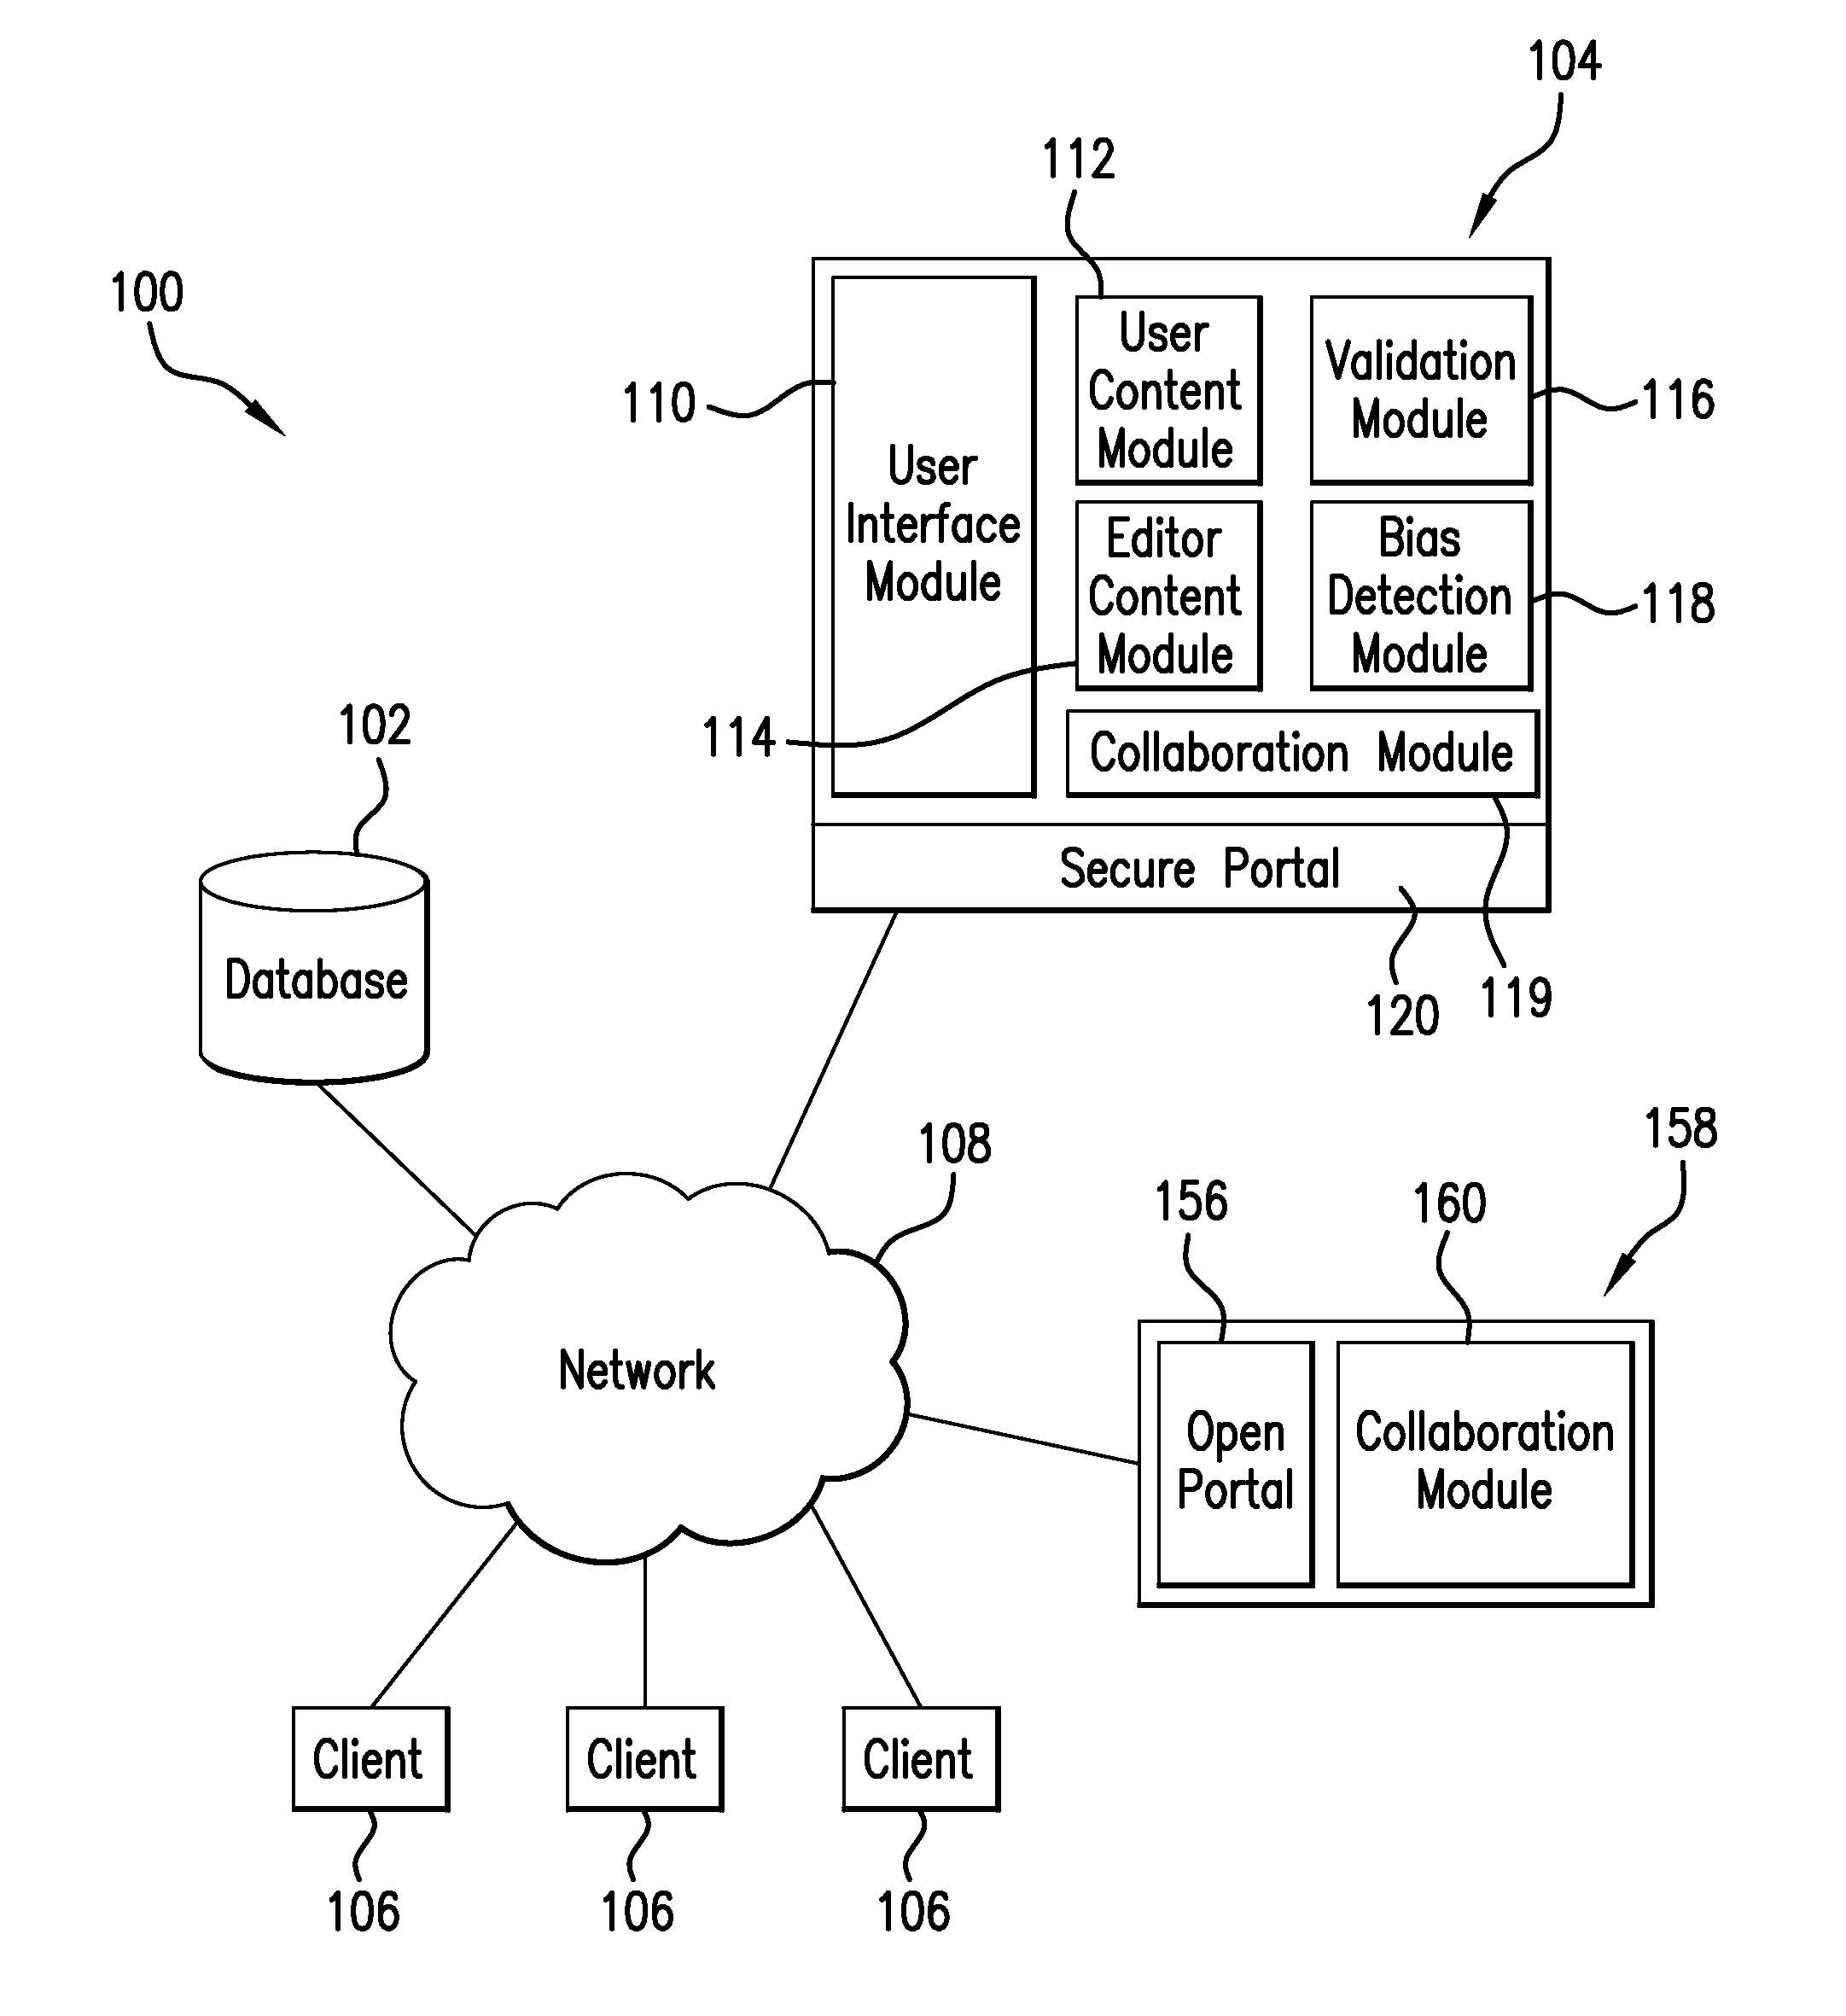 Systems and methods for integrating user-generated content with proprietary content in a database